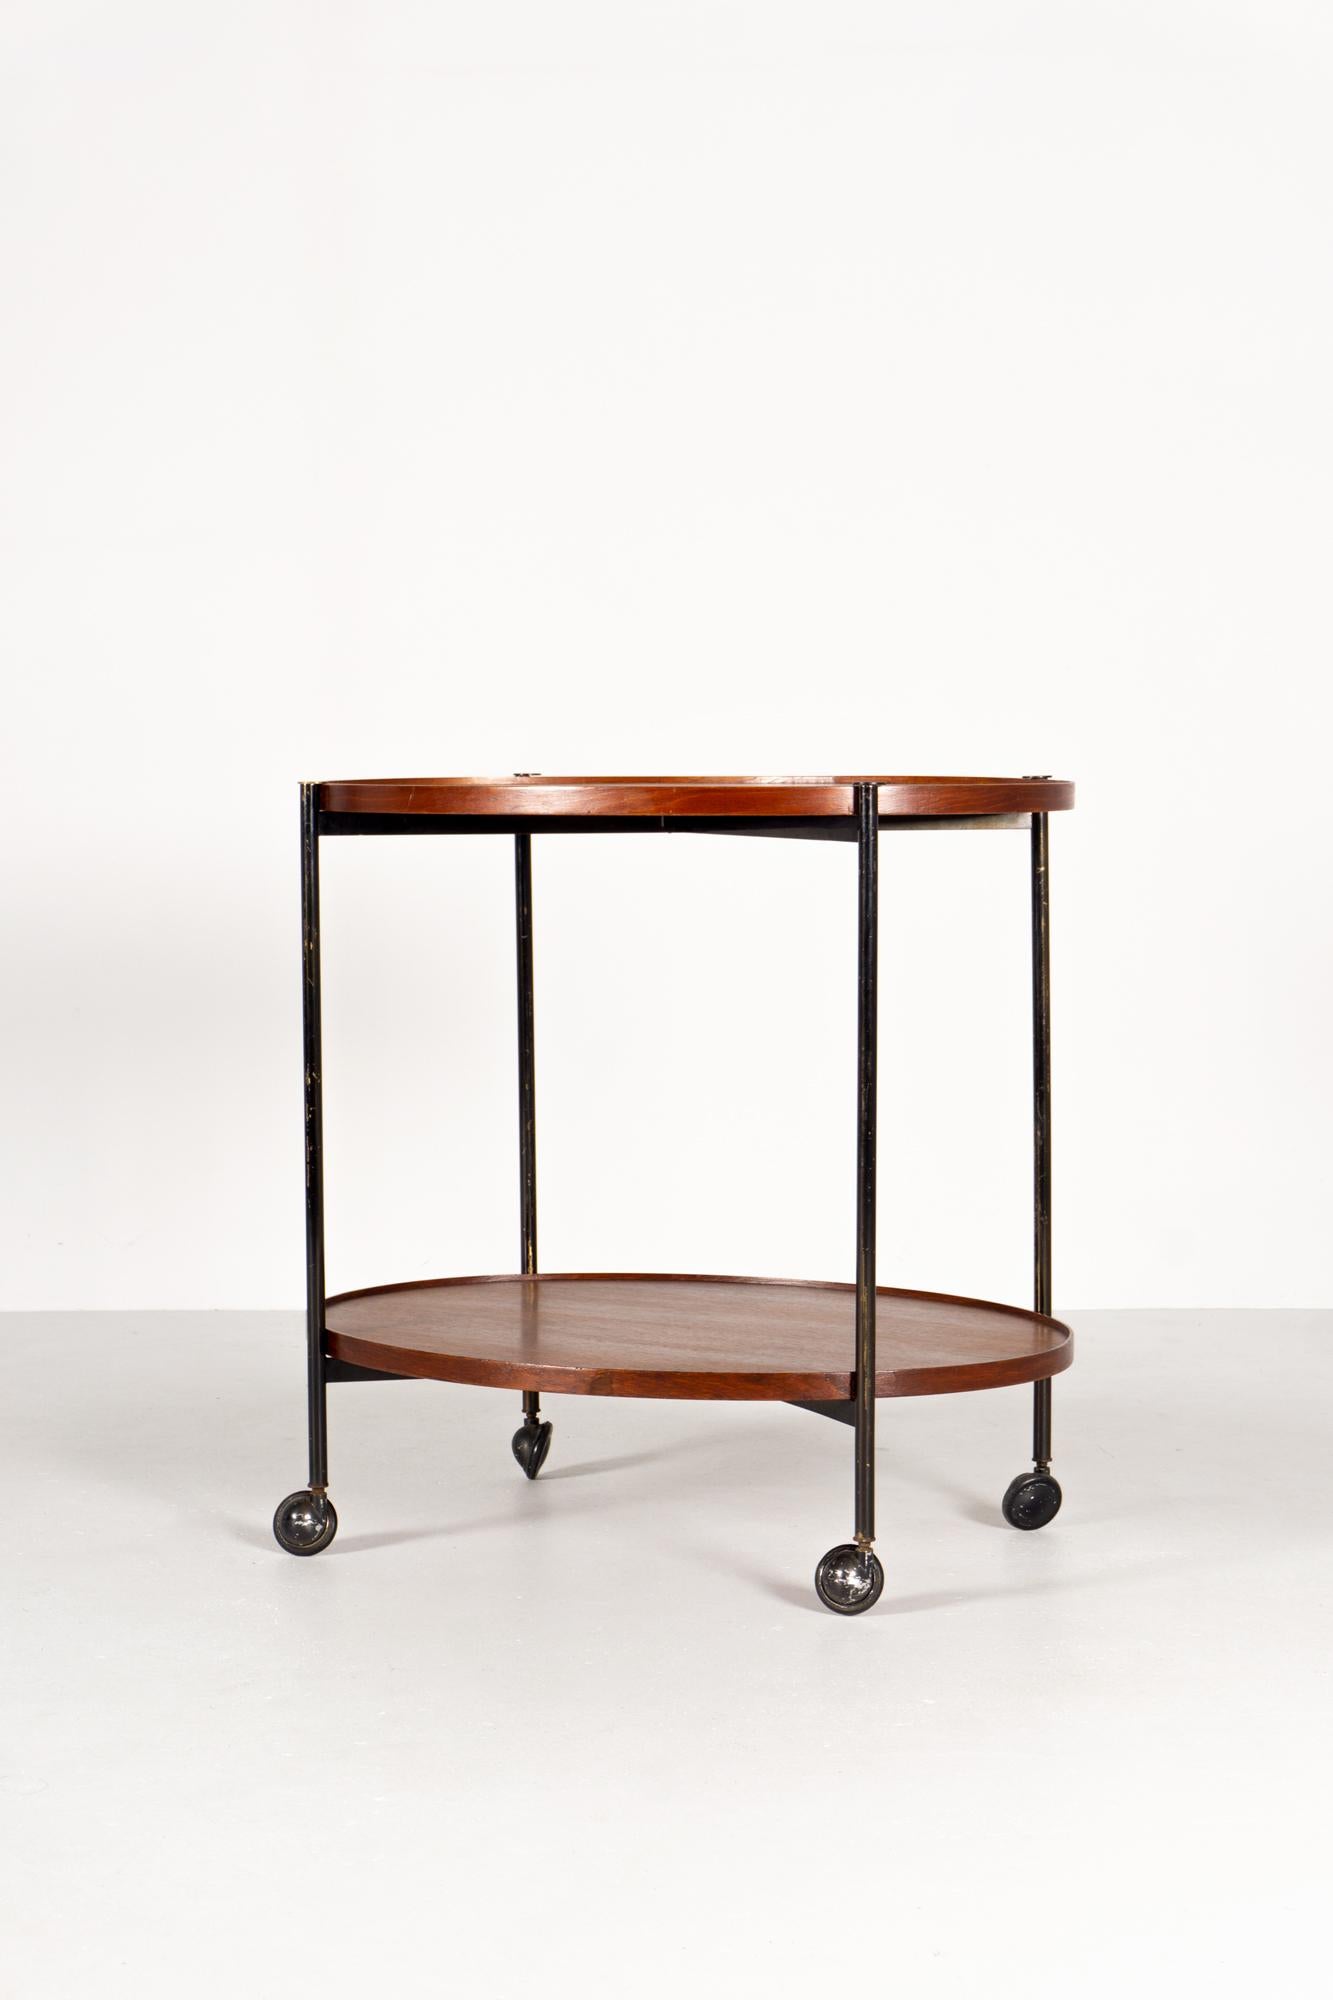 Bar trolley on casters, oval, upper tray removable
Black lacquered brass construction, trays
teak wood

Paolo Tilche graduated from Milan Polytechnic in 1949. 

He immediately began working as an architect and developed both residential and